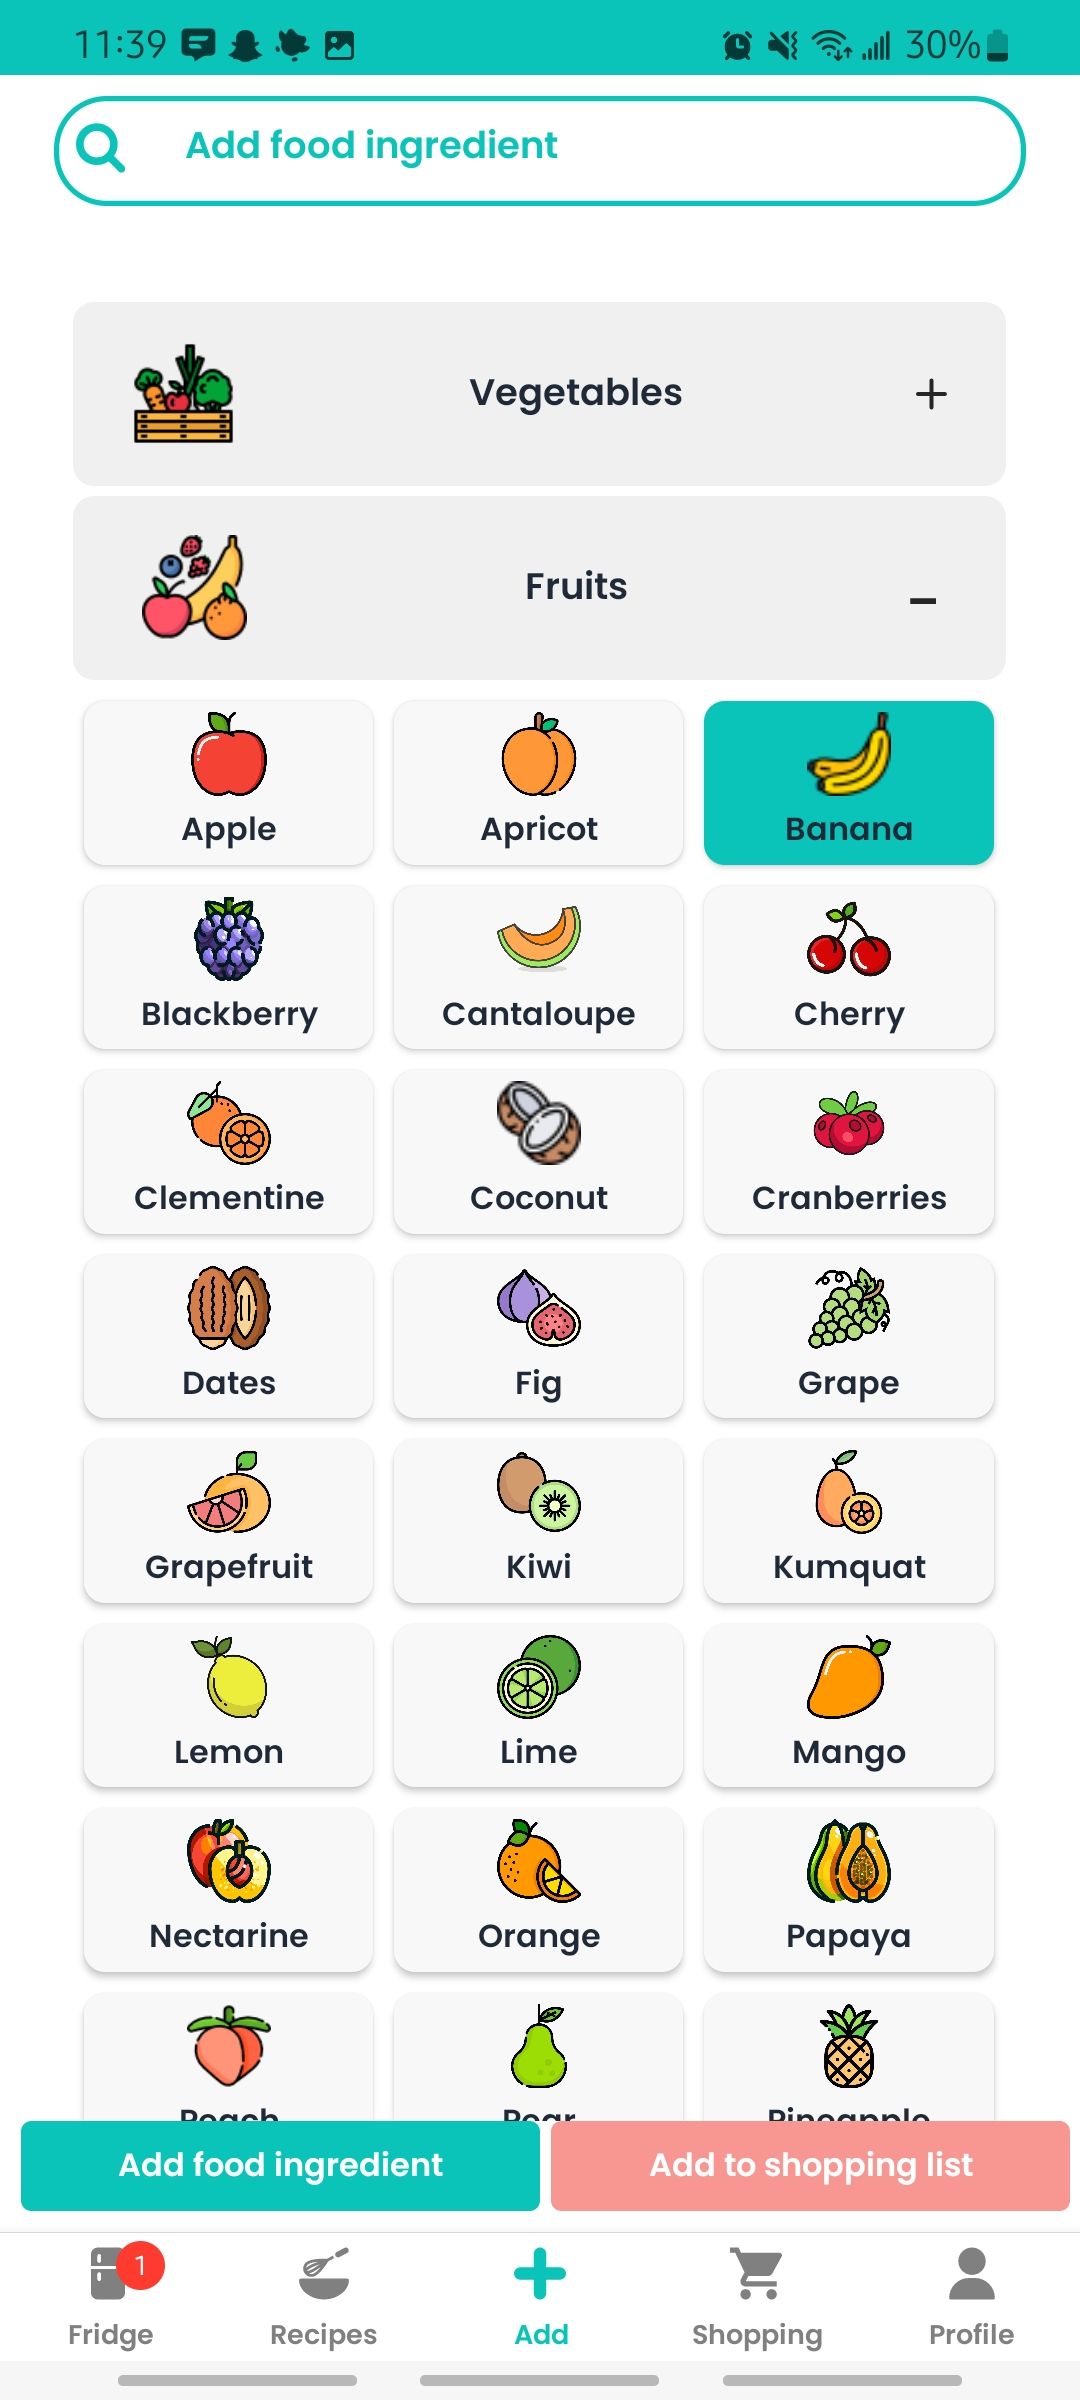 adding a food ingredient to emptymyfridge by category